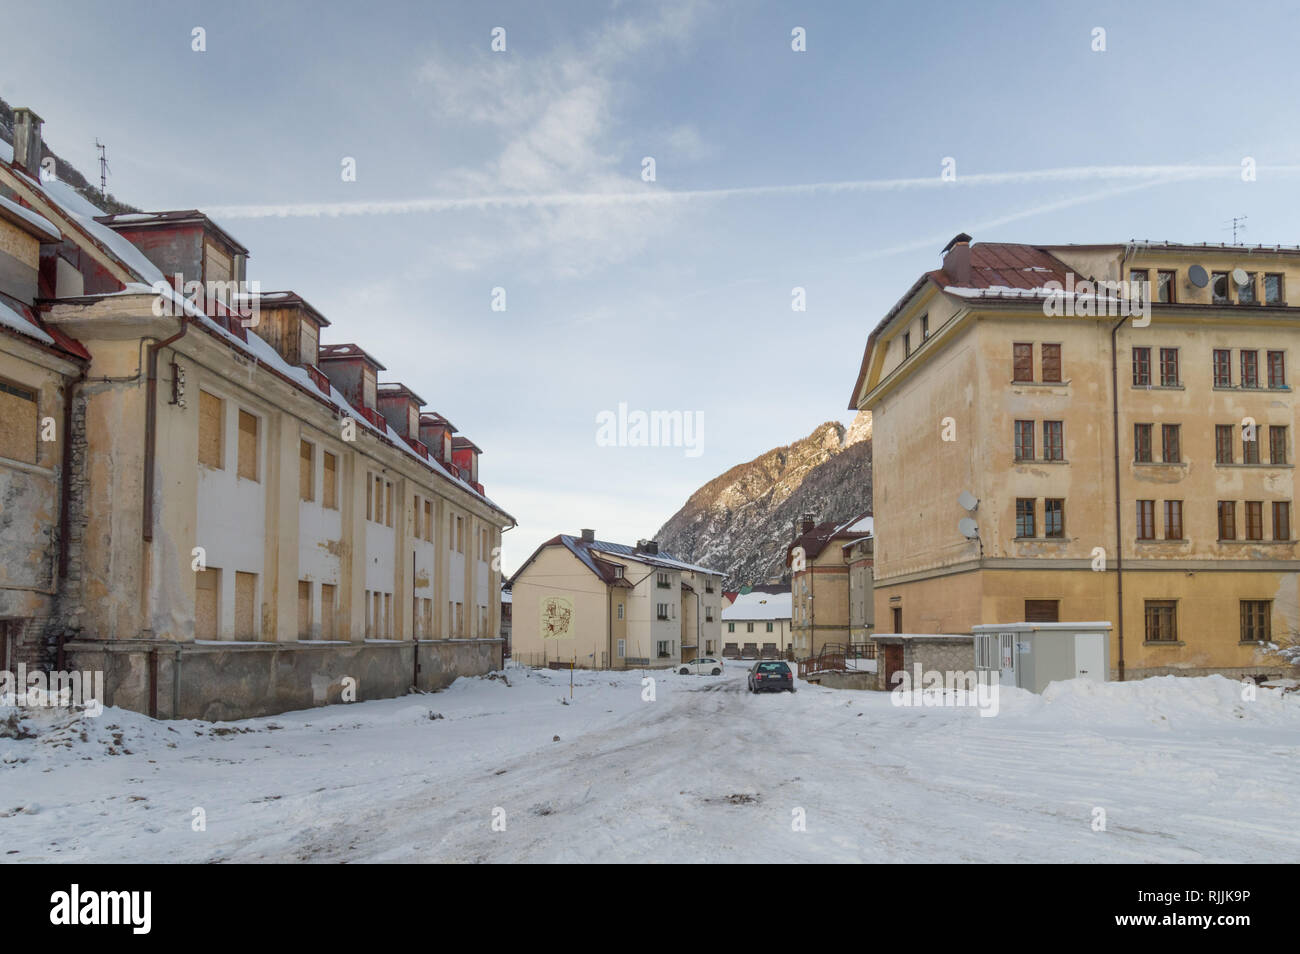 Cave del Predil, Italy (26th January 2019) - Old apartment buildings of the miners' families in the alpine mining town of Cave del Predil in winter Stock Photo